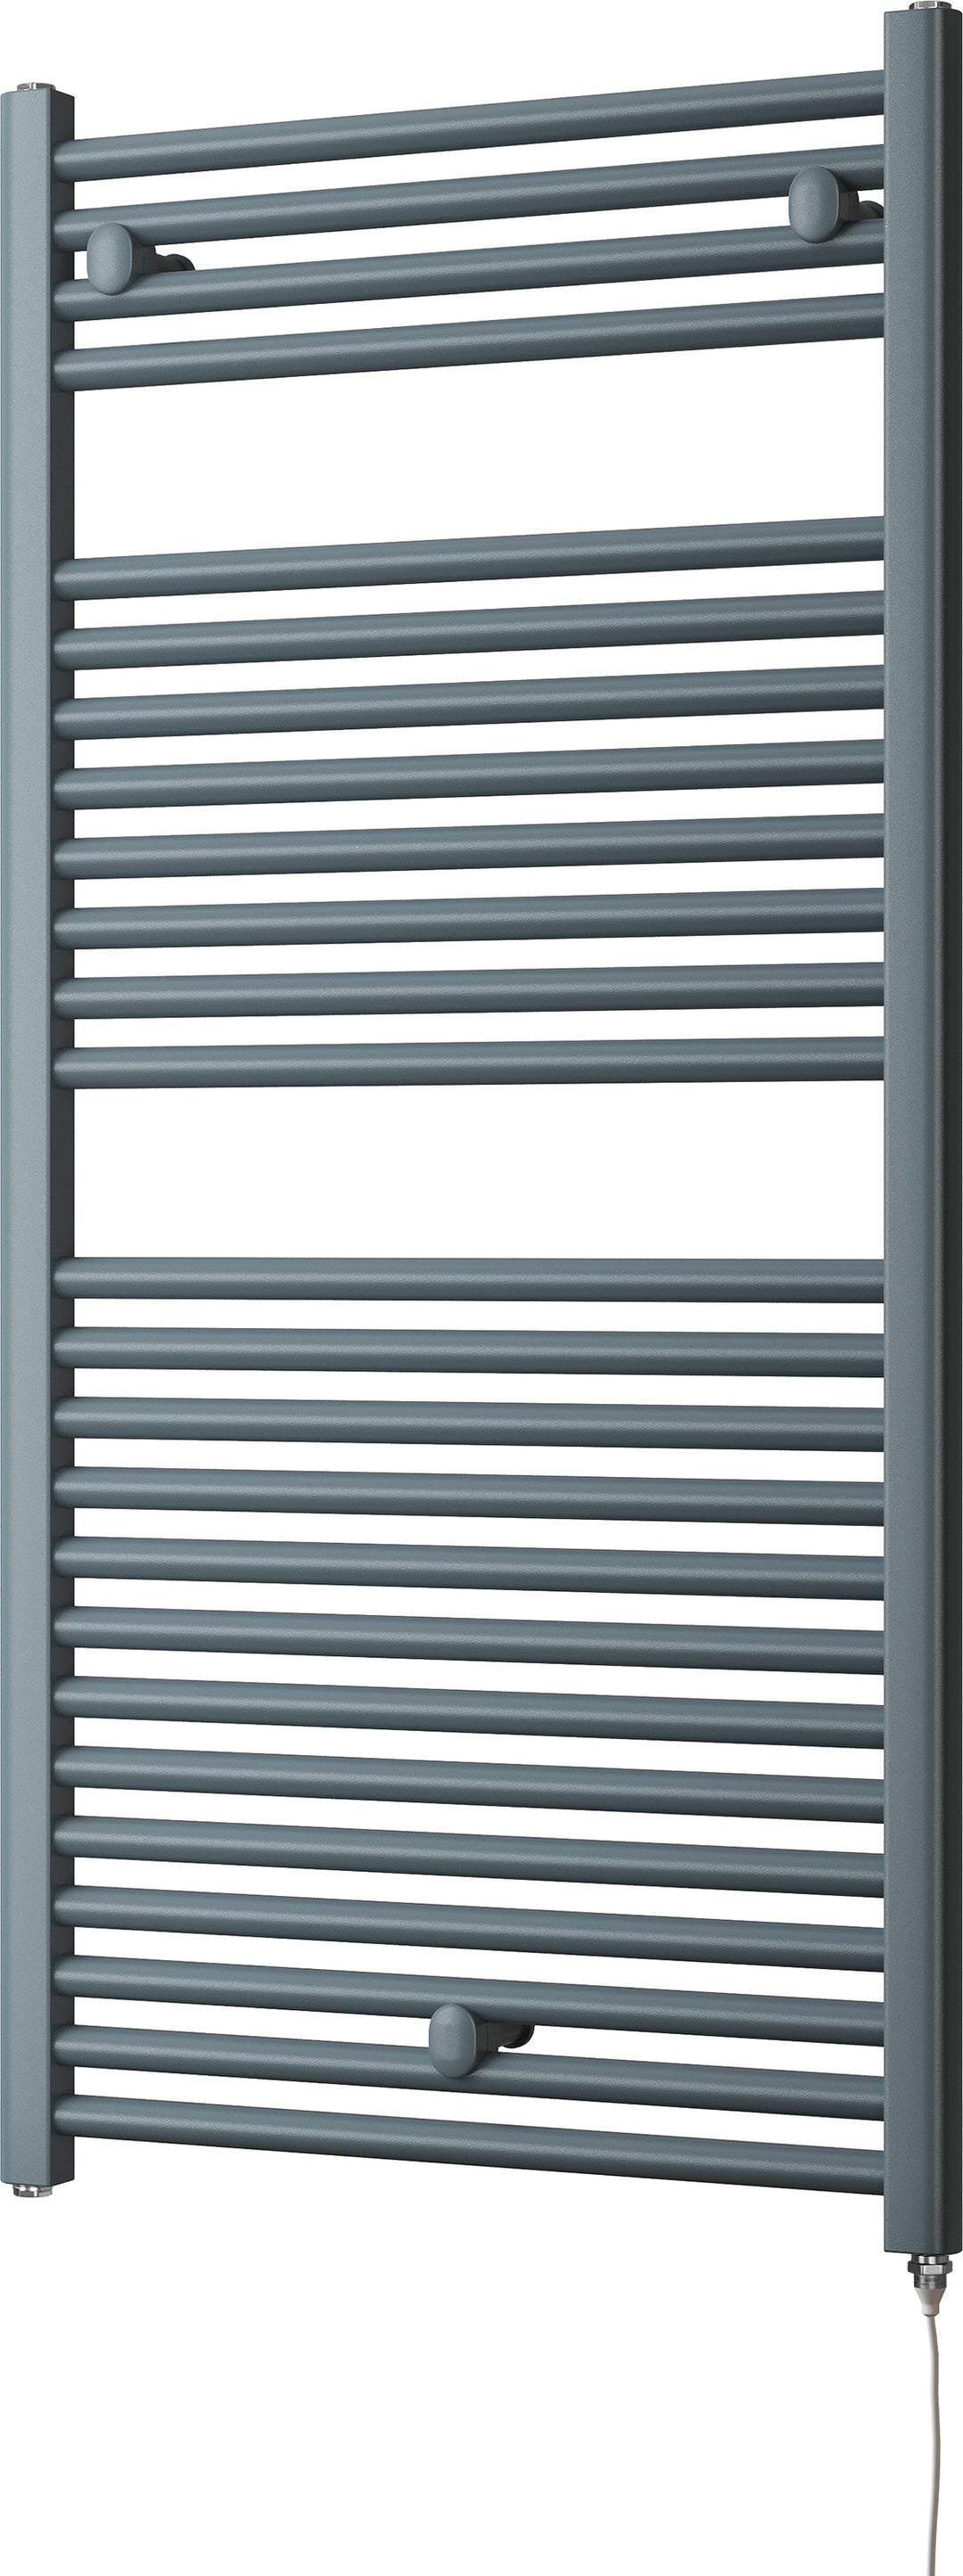 Roma - Anthracite Electric Towel Rail H1230mm x W600mm Straight 600w Standard